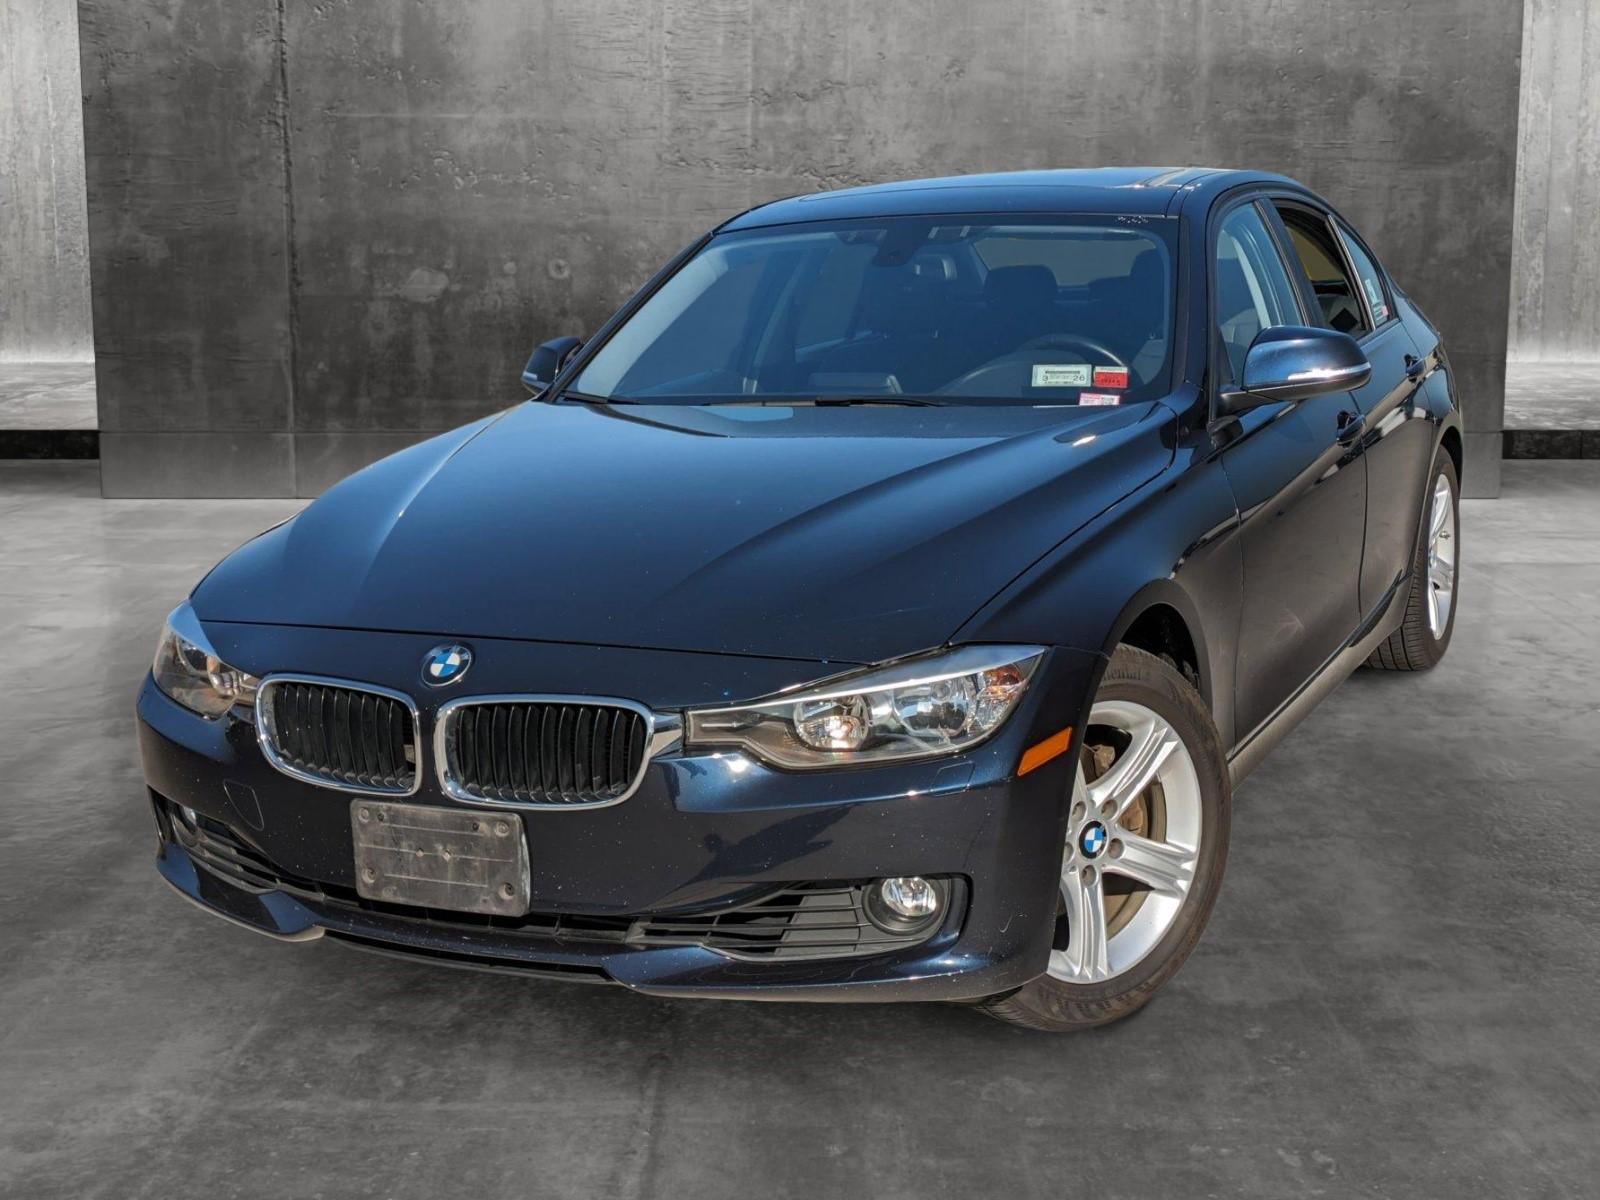 2013 BMW 328i xDrive Vehicle Photo in Rockville, MD 20852